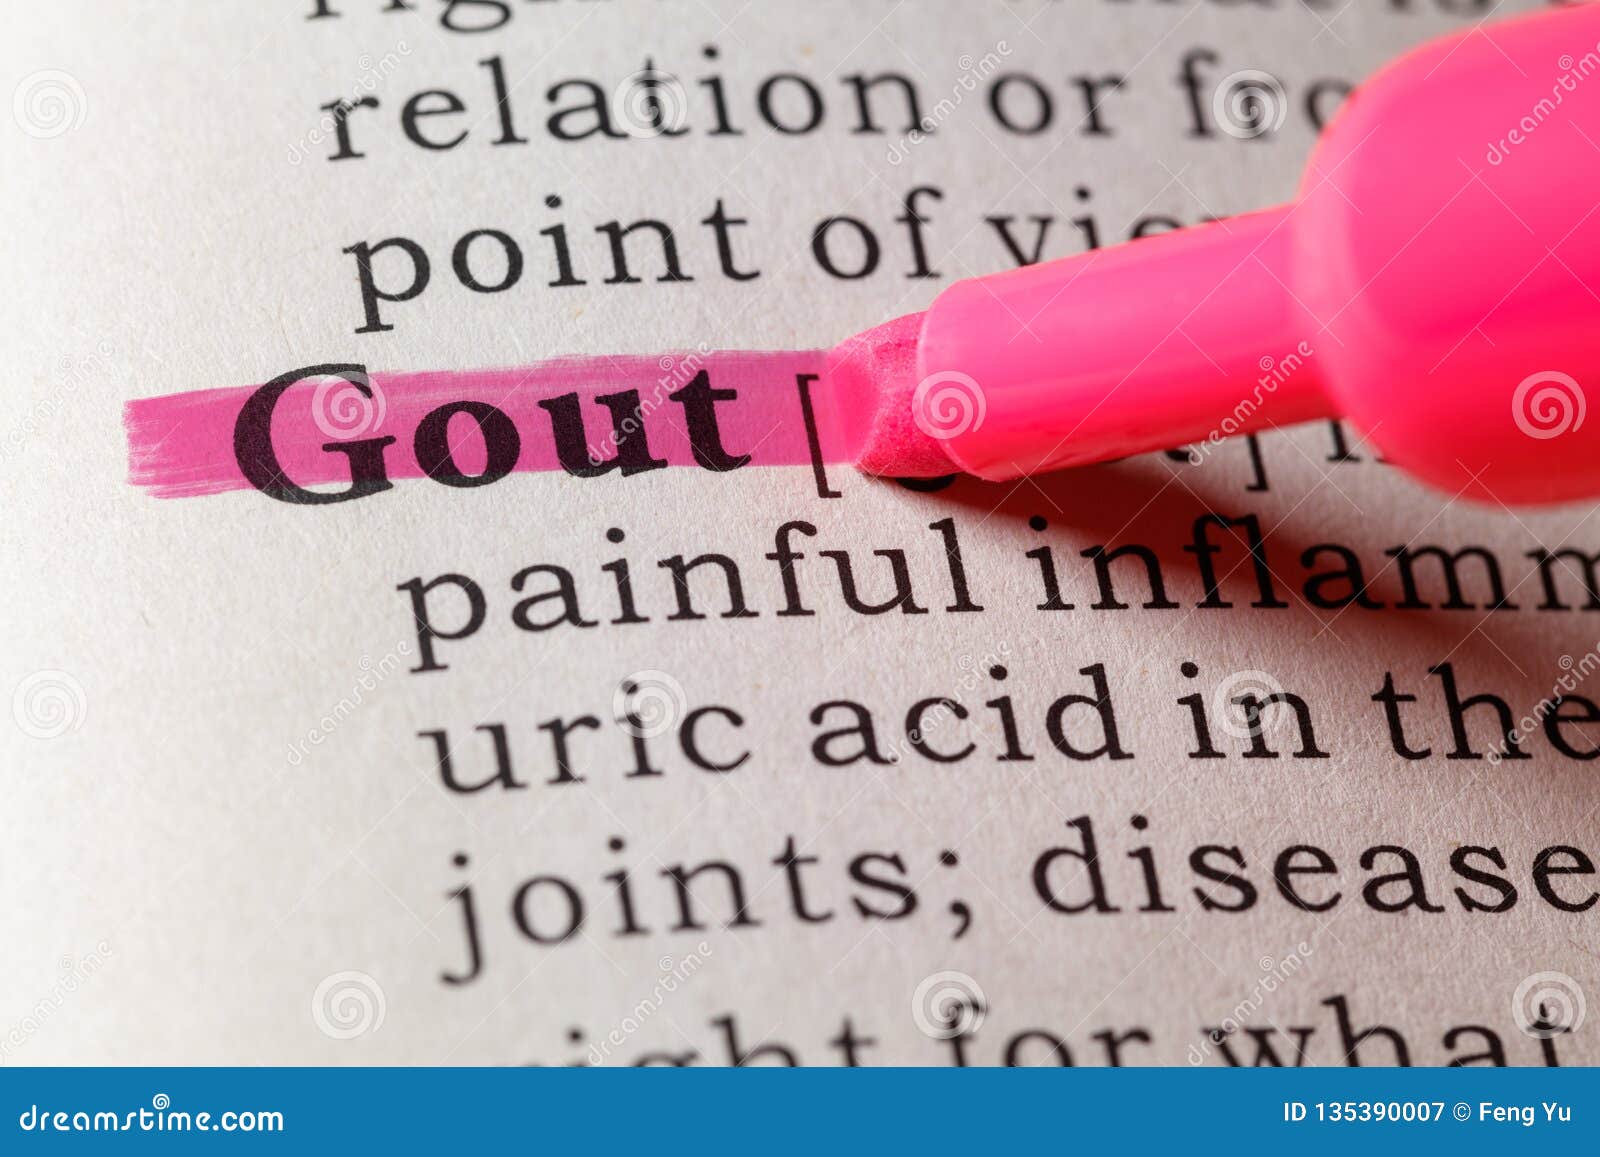 dictionary definition of gout